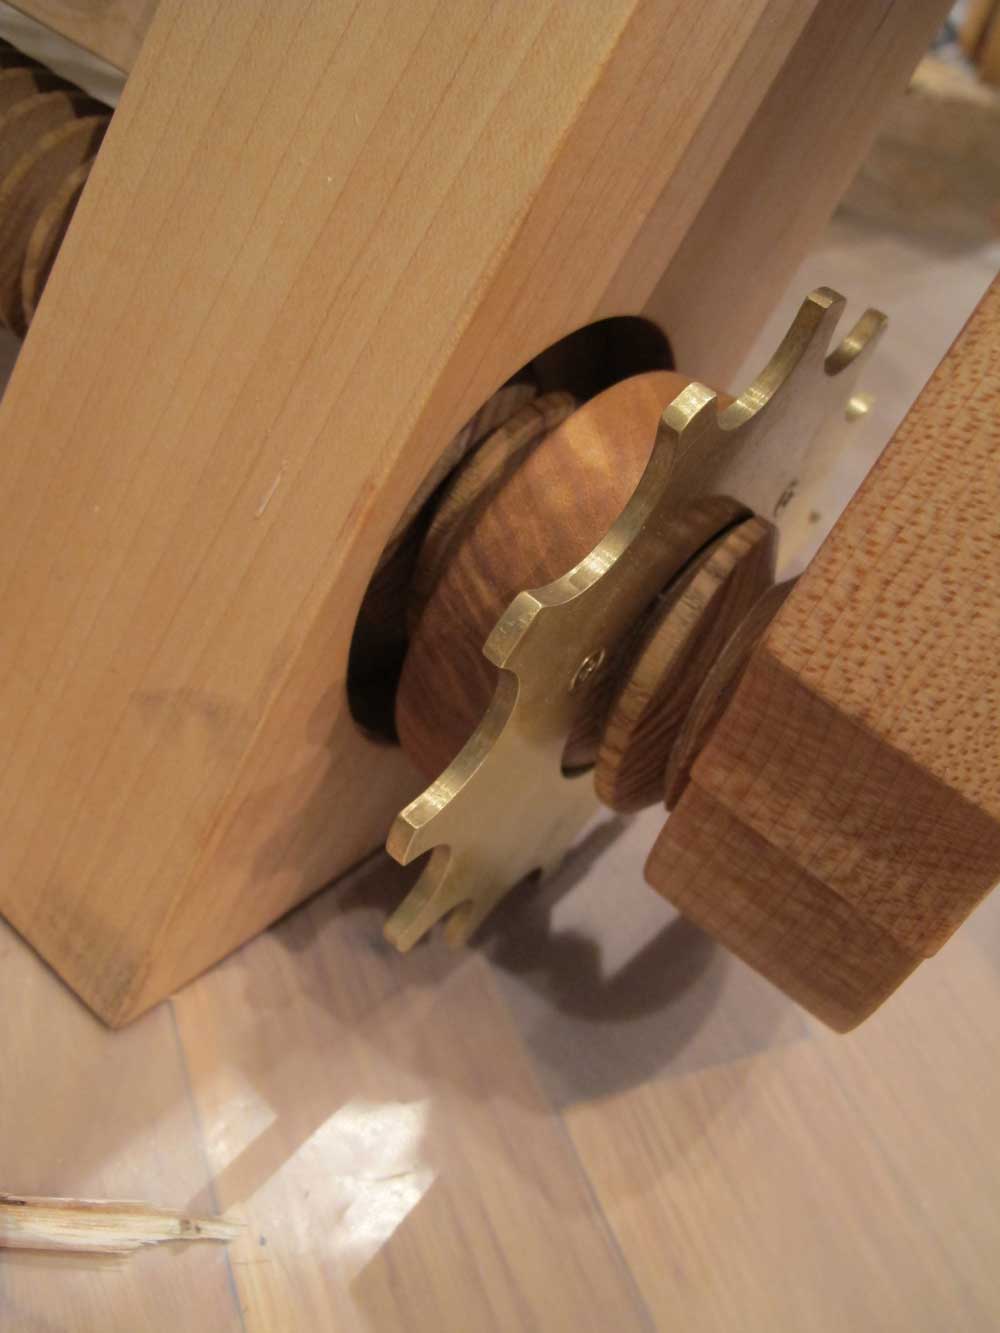 Laminate File A Woodworking Hand Tool You Didn T Know You Needed Popular Woodworking Magazine